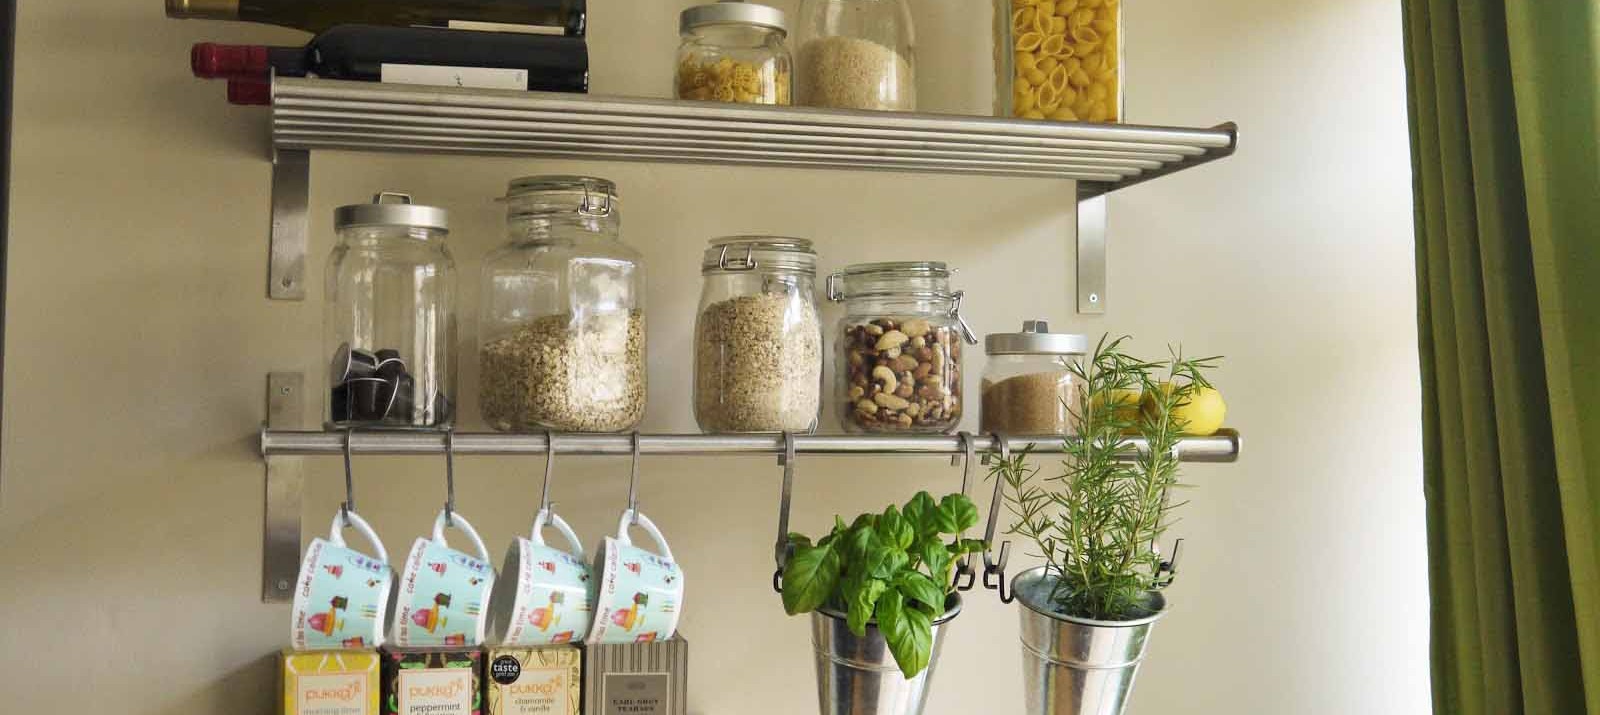 Shelves to Save Space in the Kitchen #2 